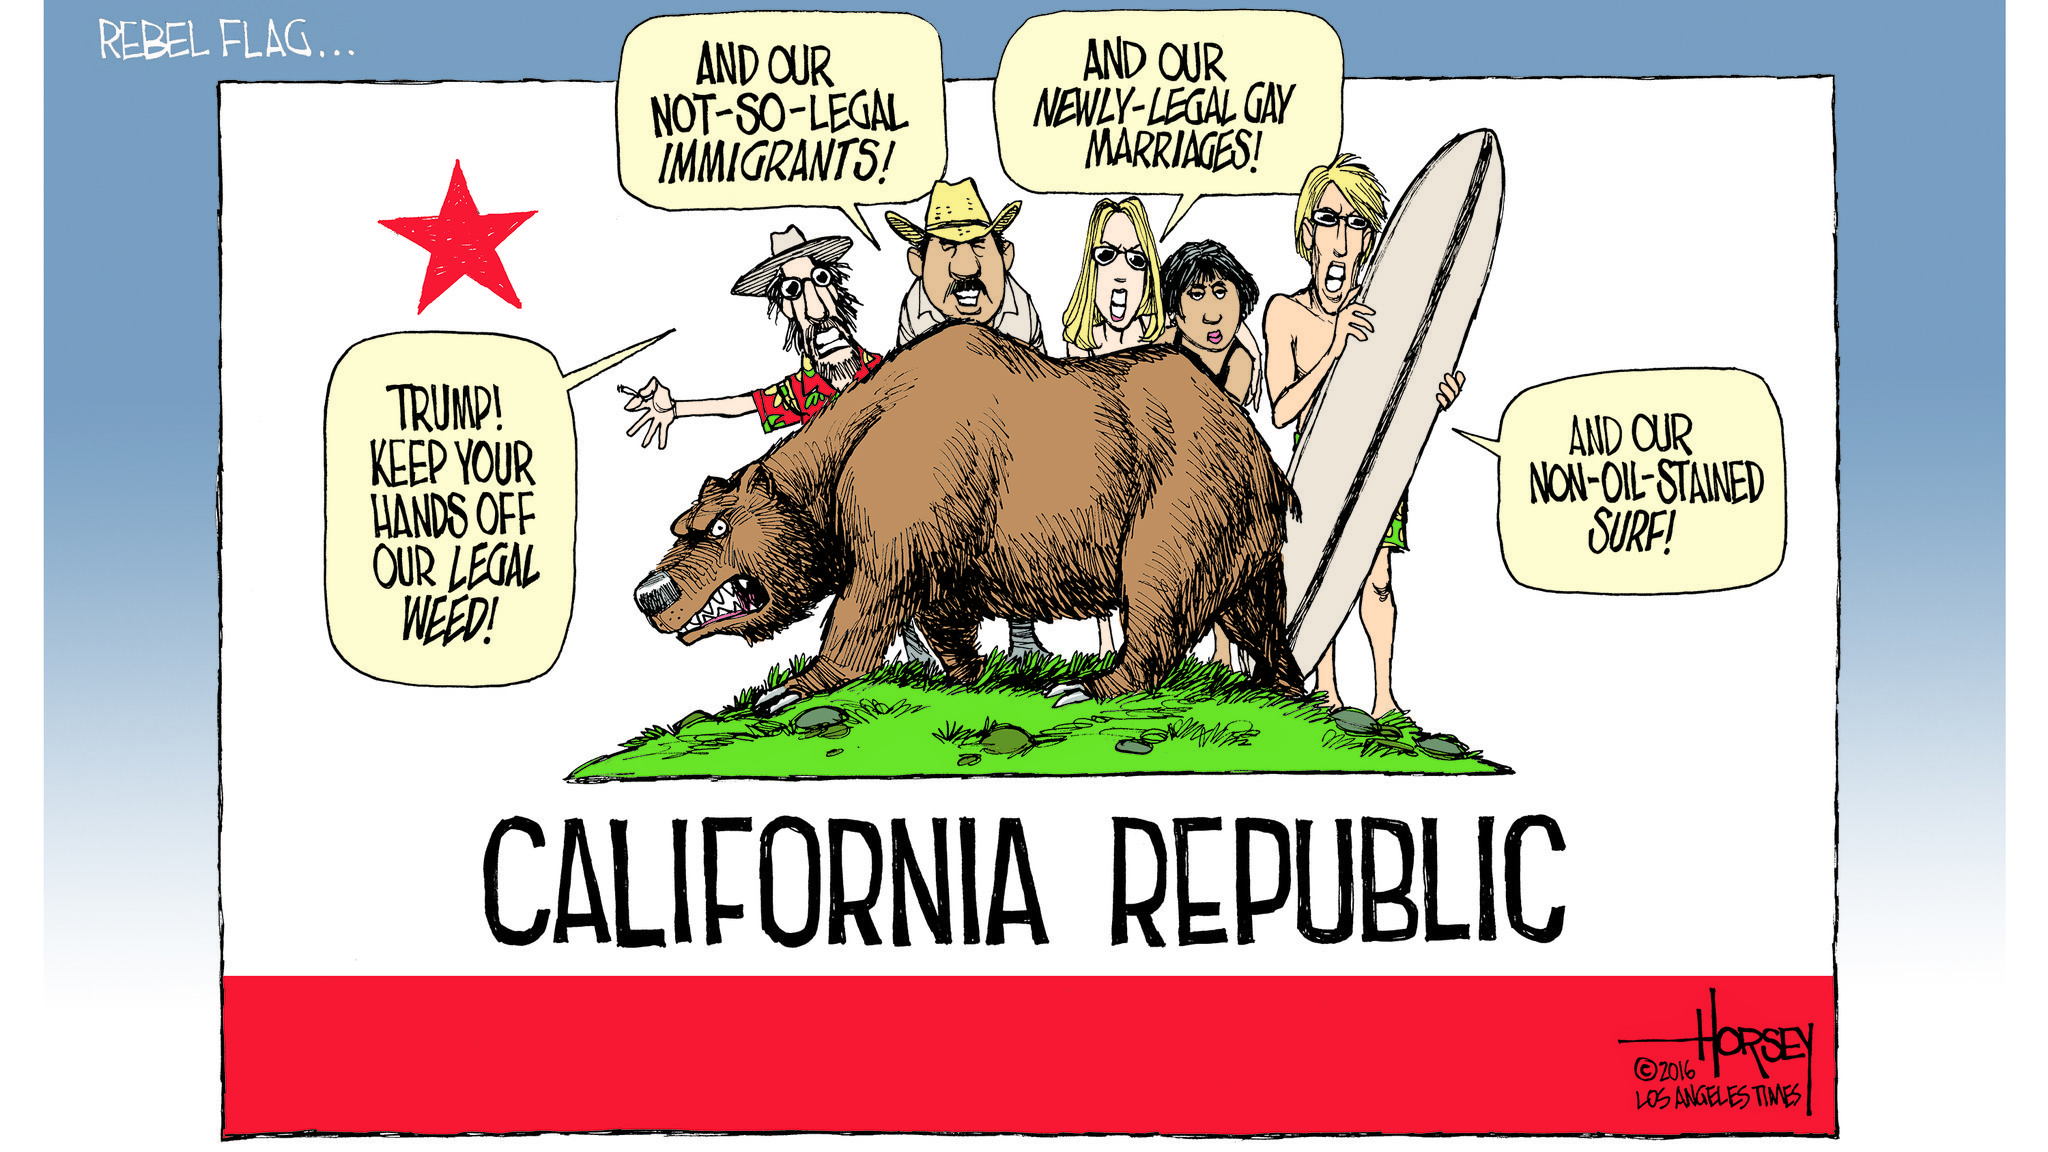 When did California become a state?